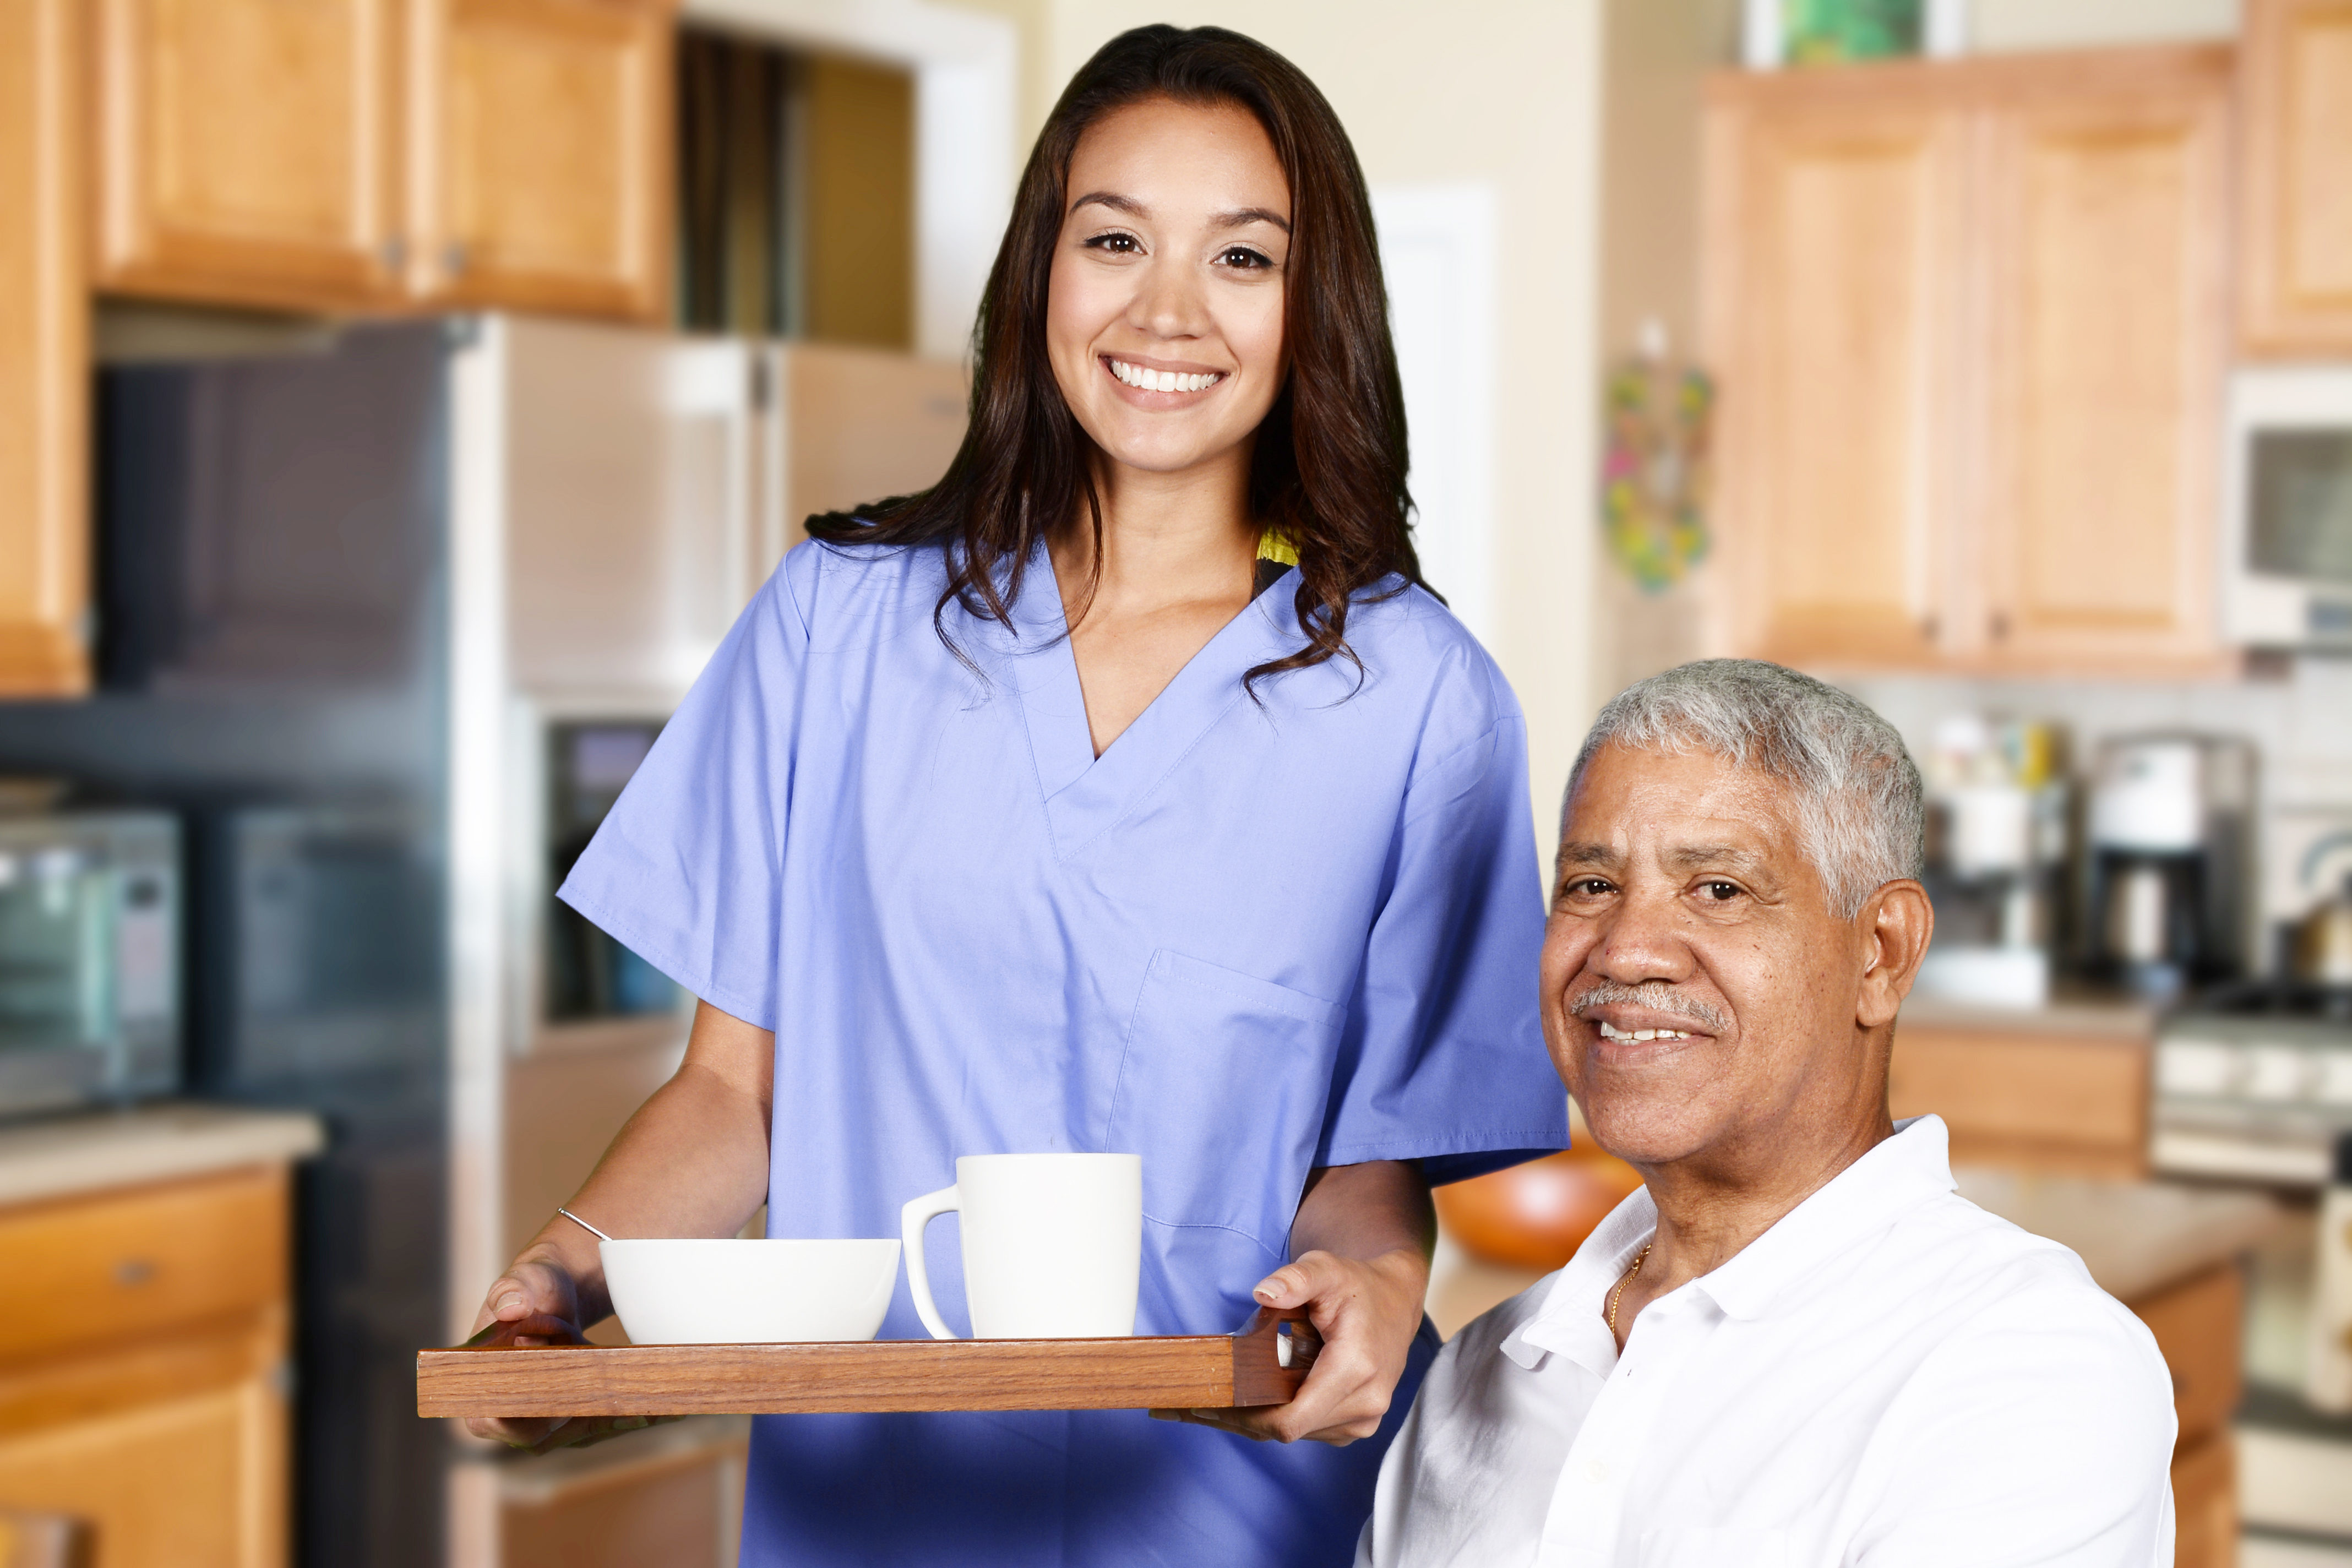 Choosing A Home Health Aide The Experts Weigh In Lk Daily Money Management